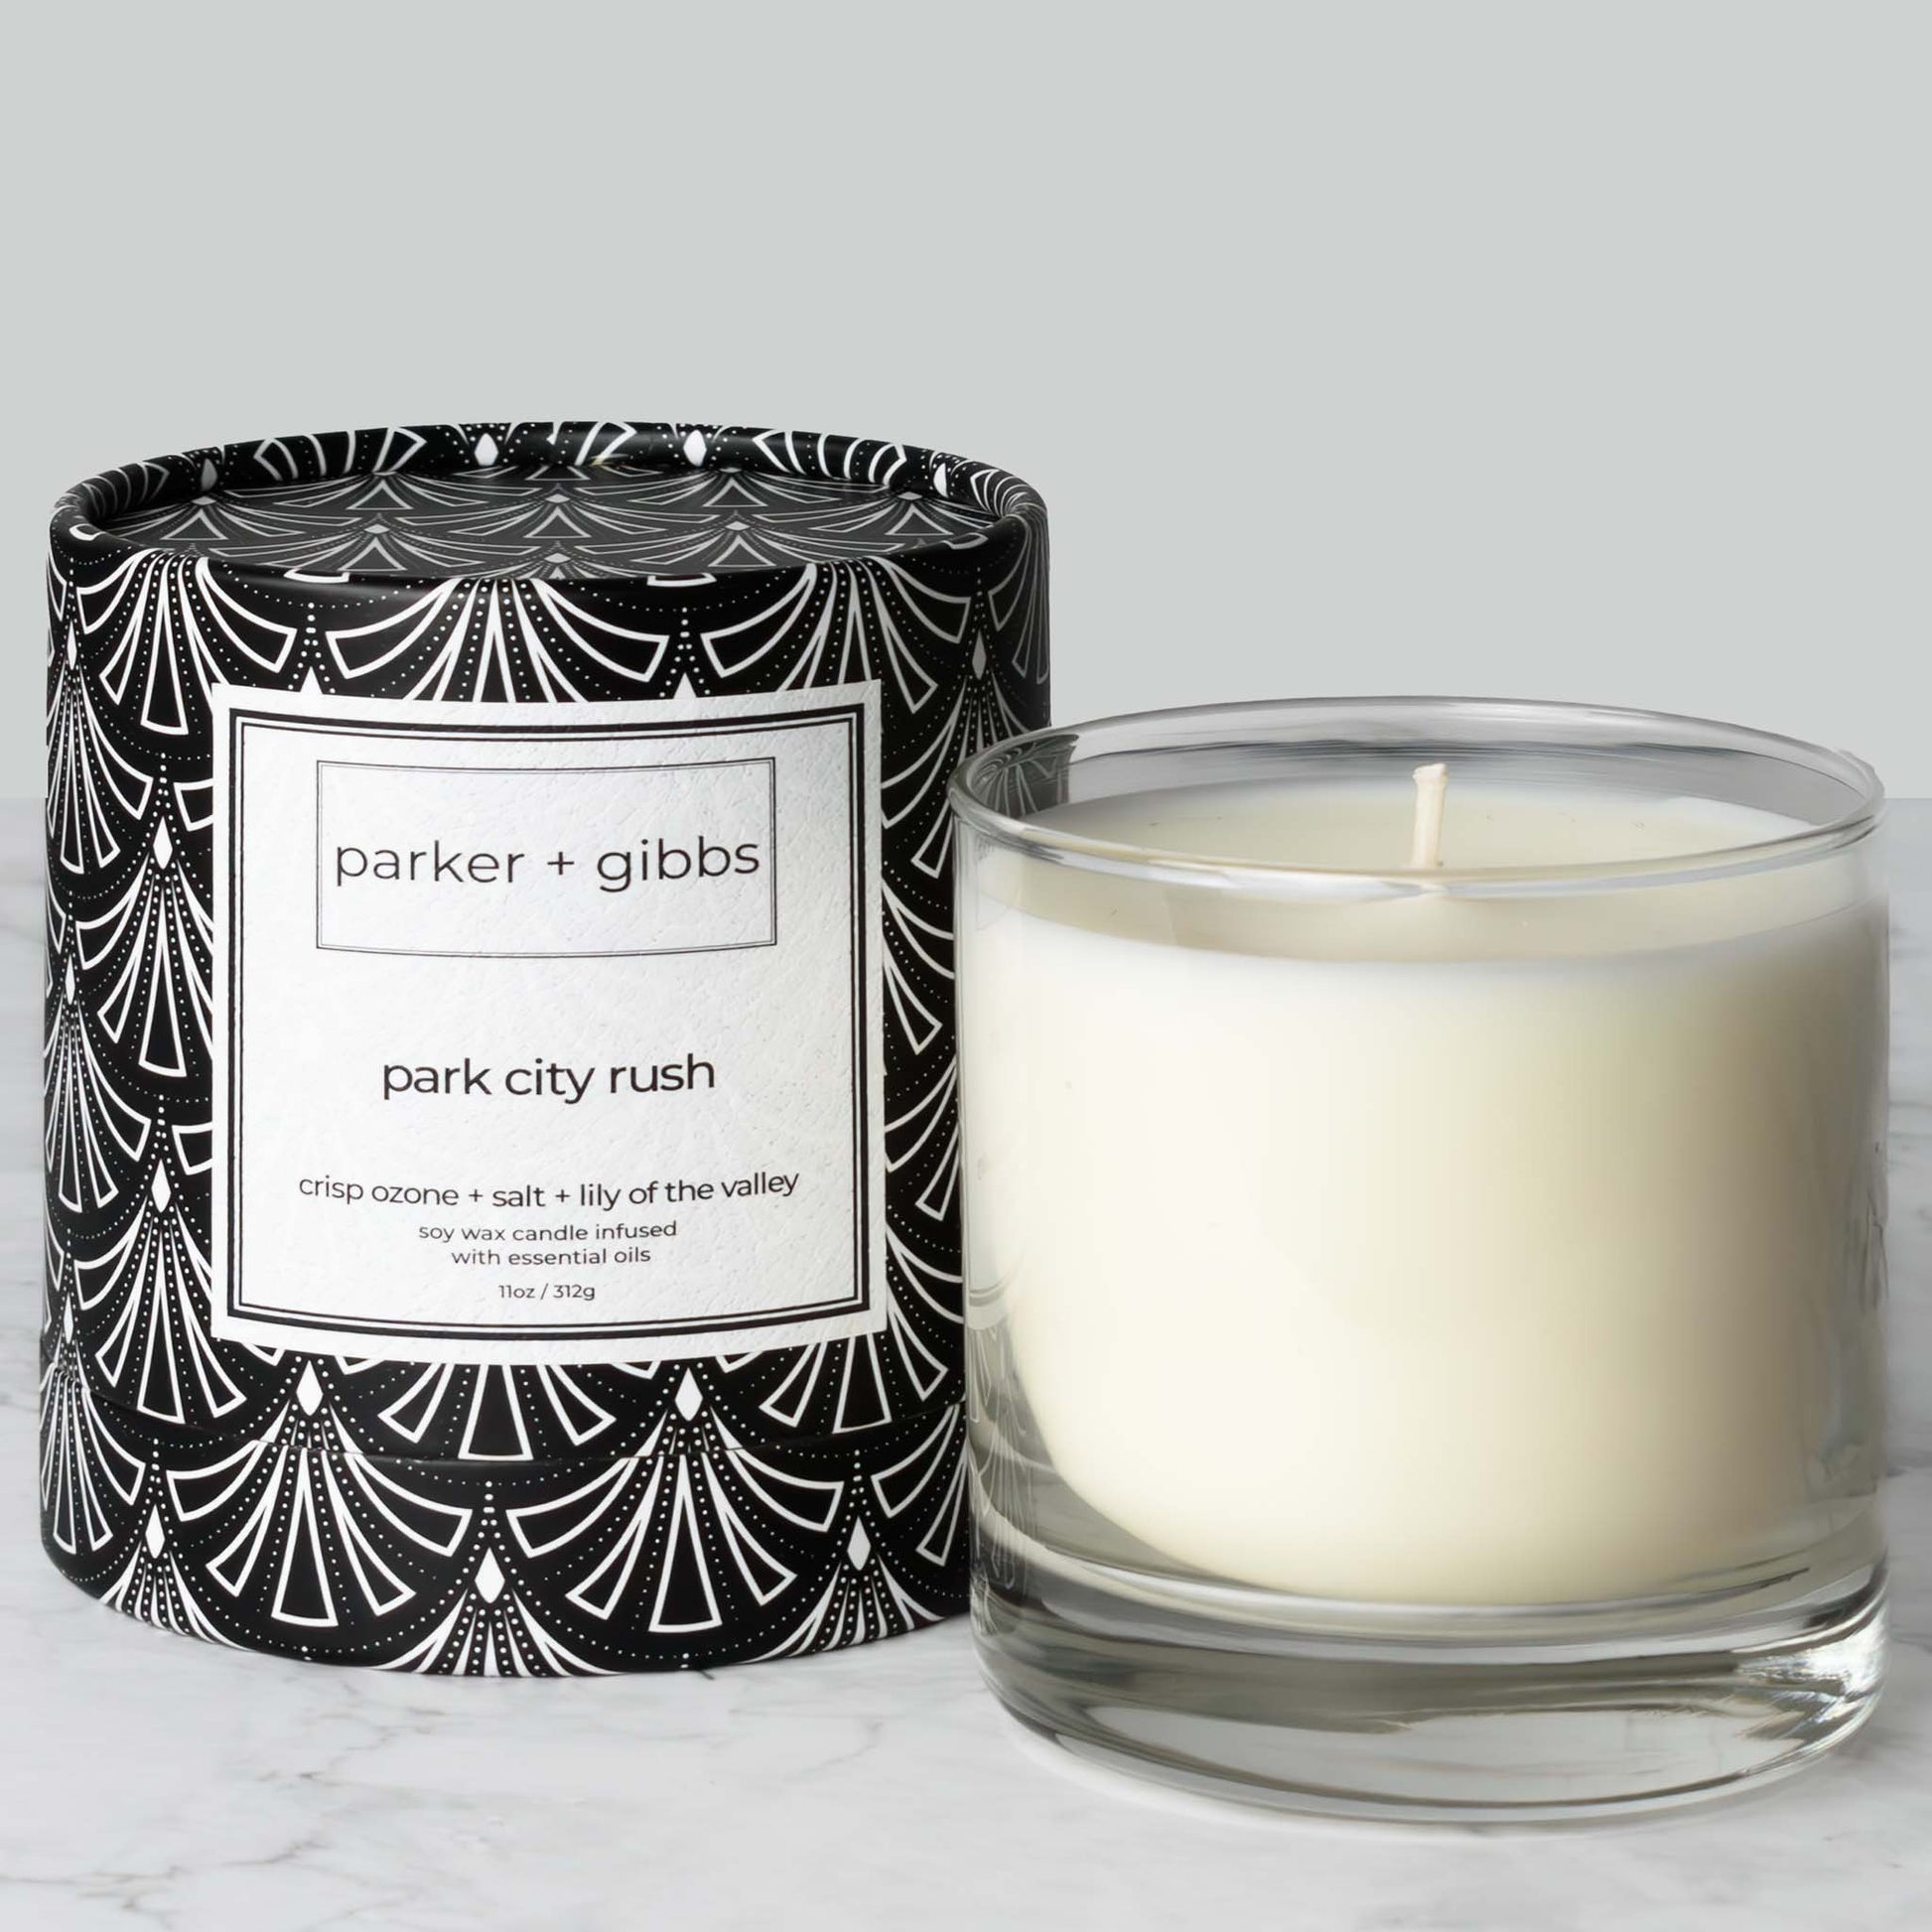 Luxury scented soy wax blend candle with ozone, salt, and lily of the valley essential oils on marble table with gray background.